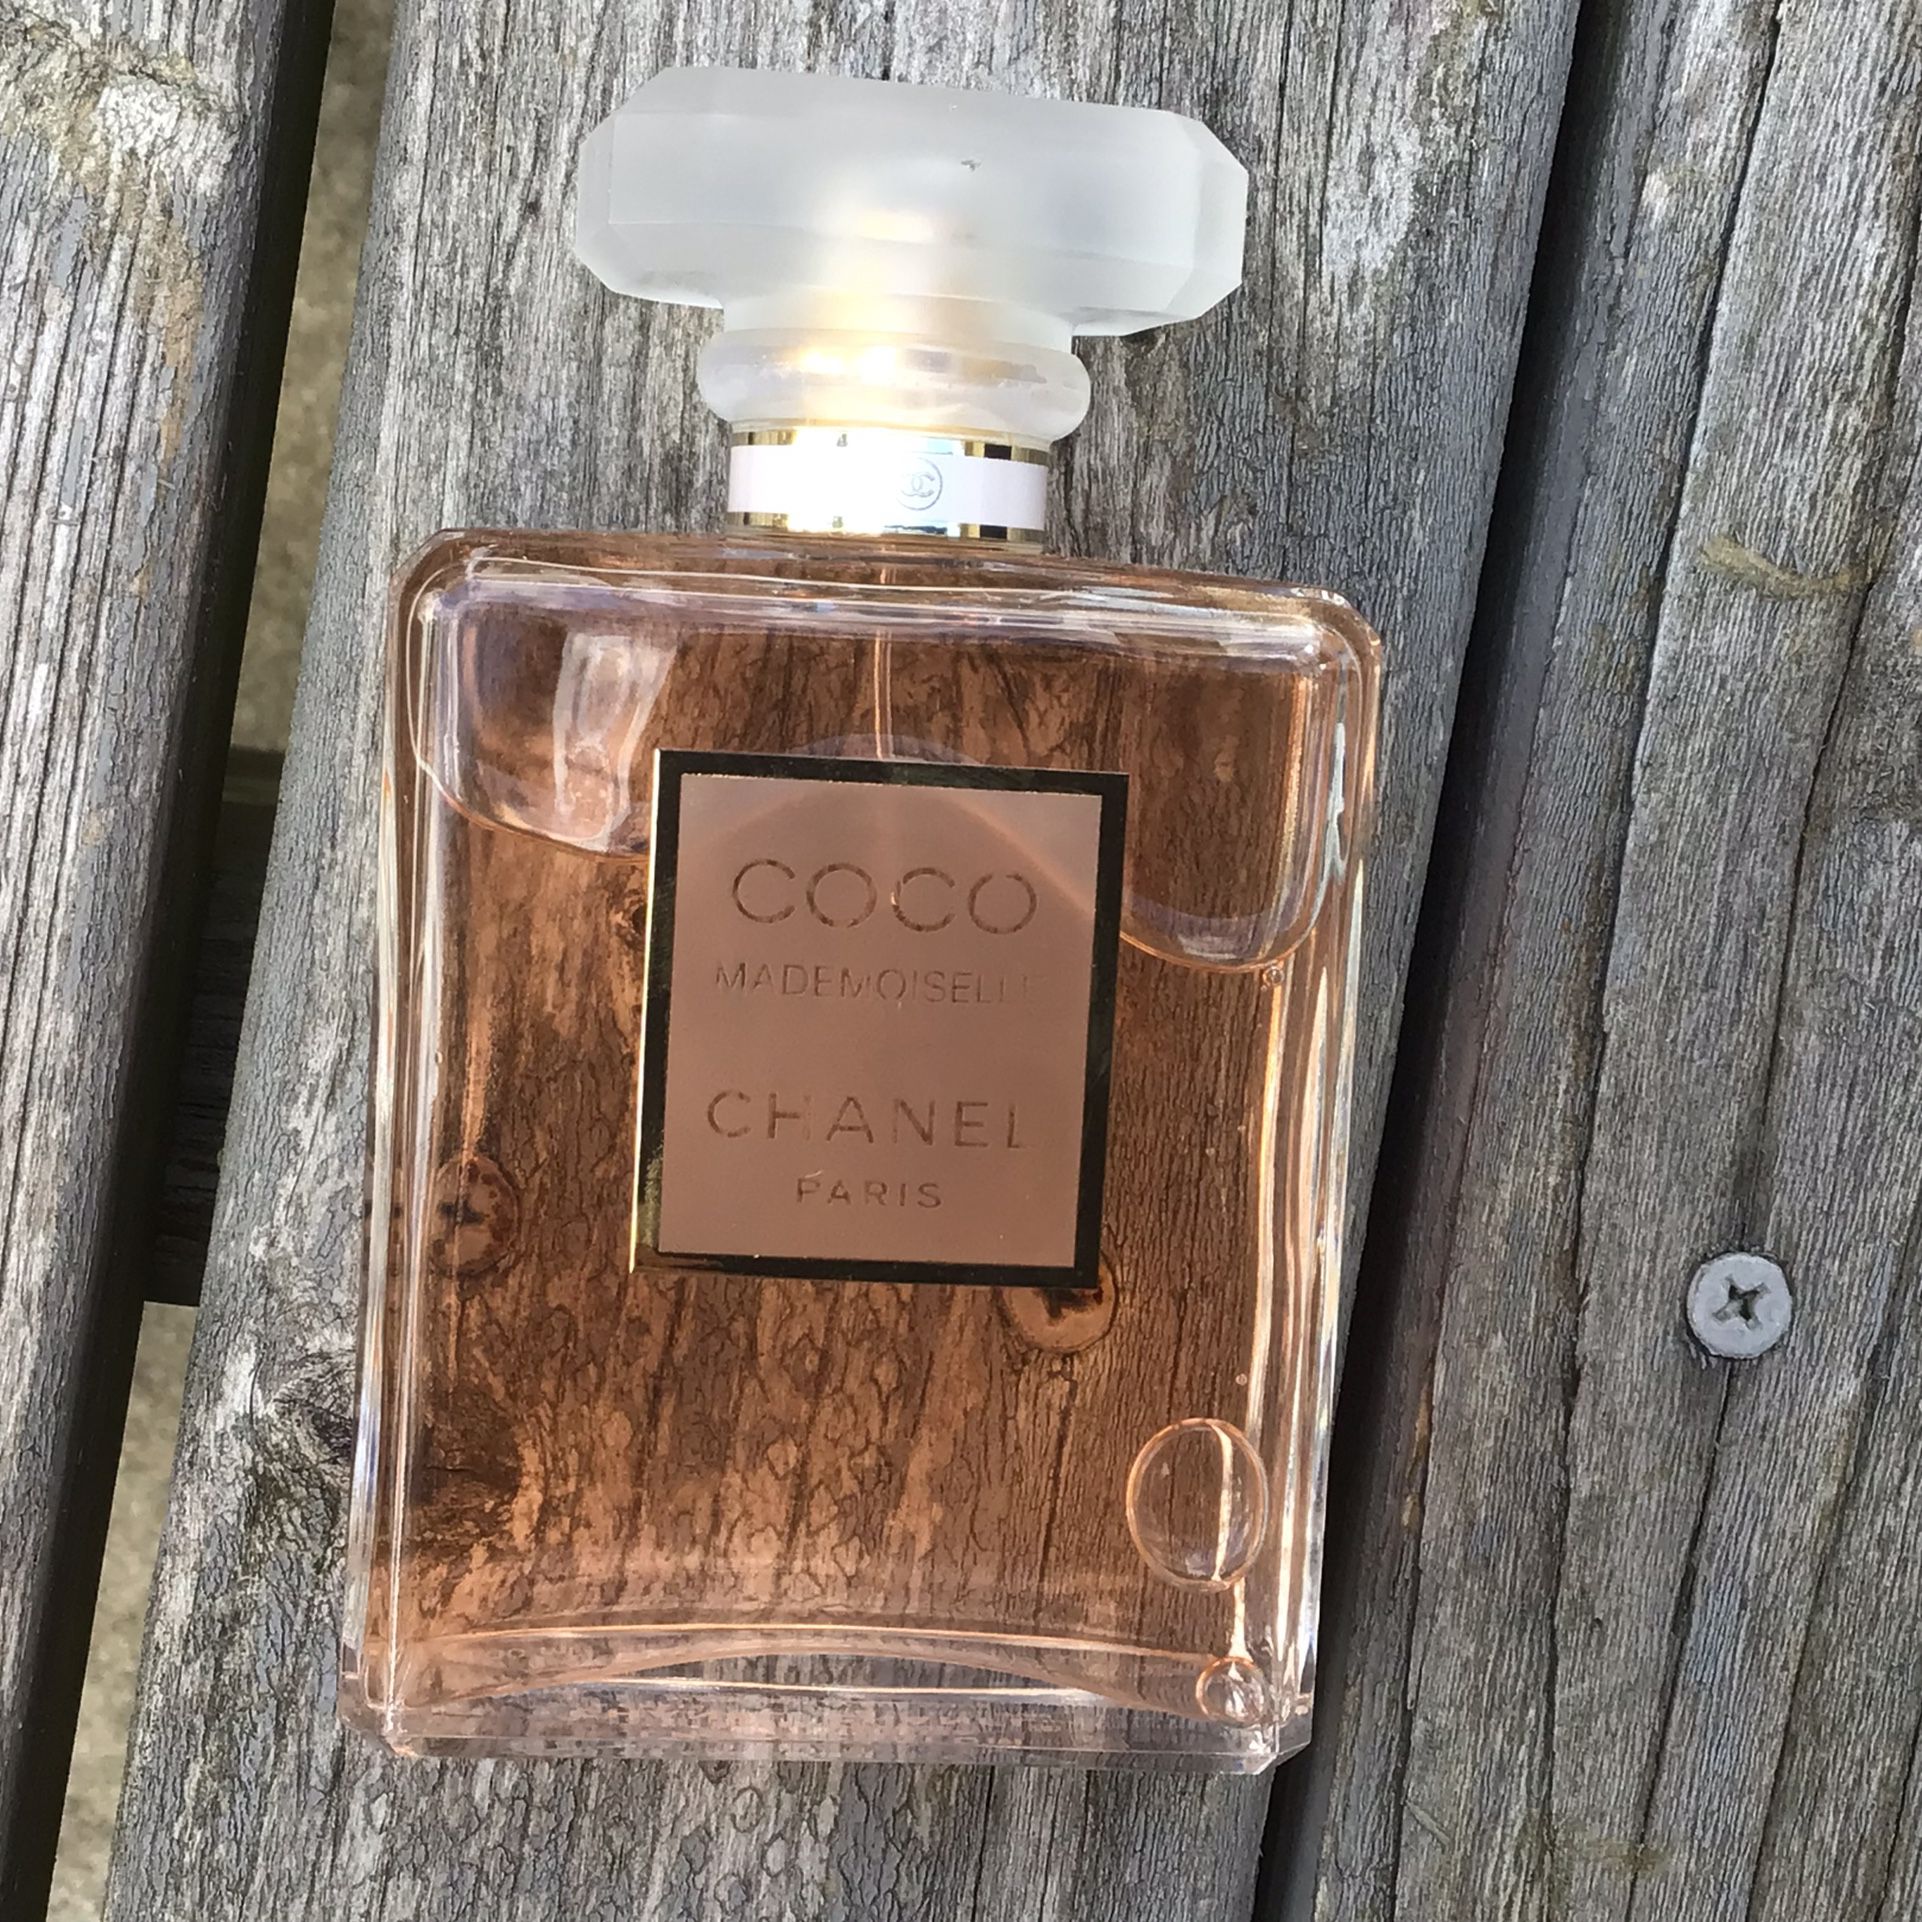 Chanel Coco Mademoiselle perfume 3.4 oz/100 ml for Sale in